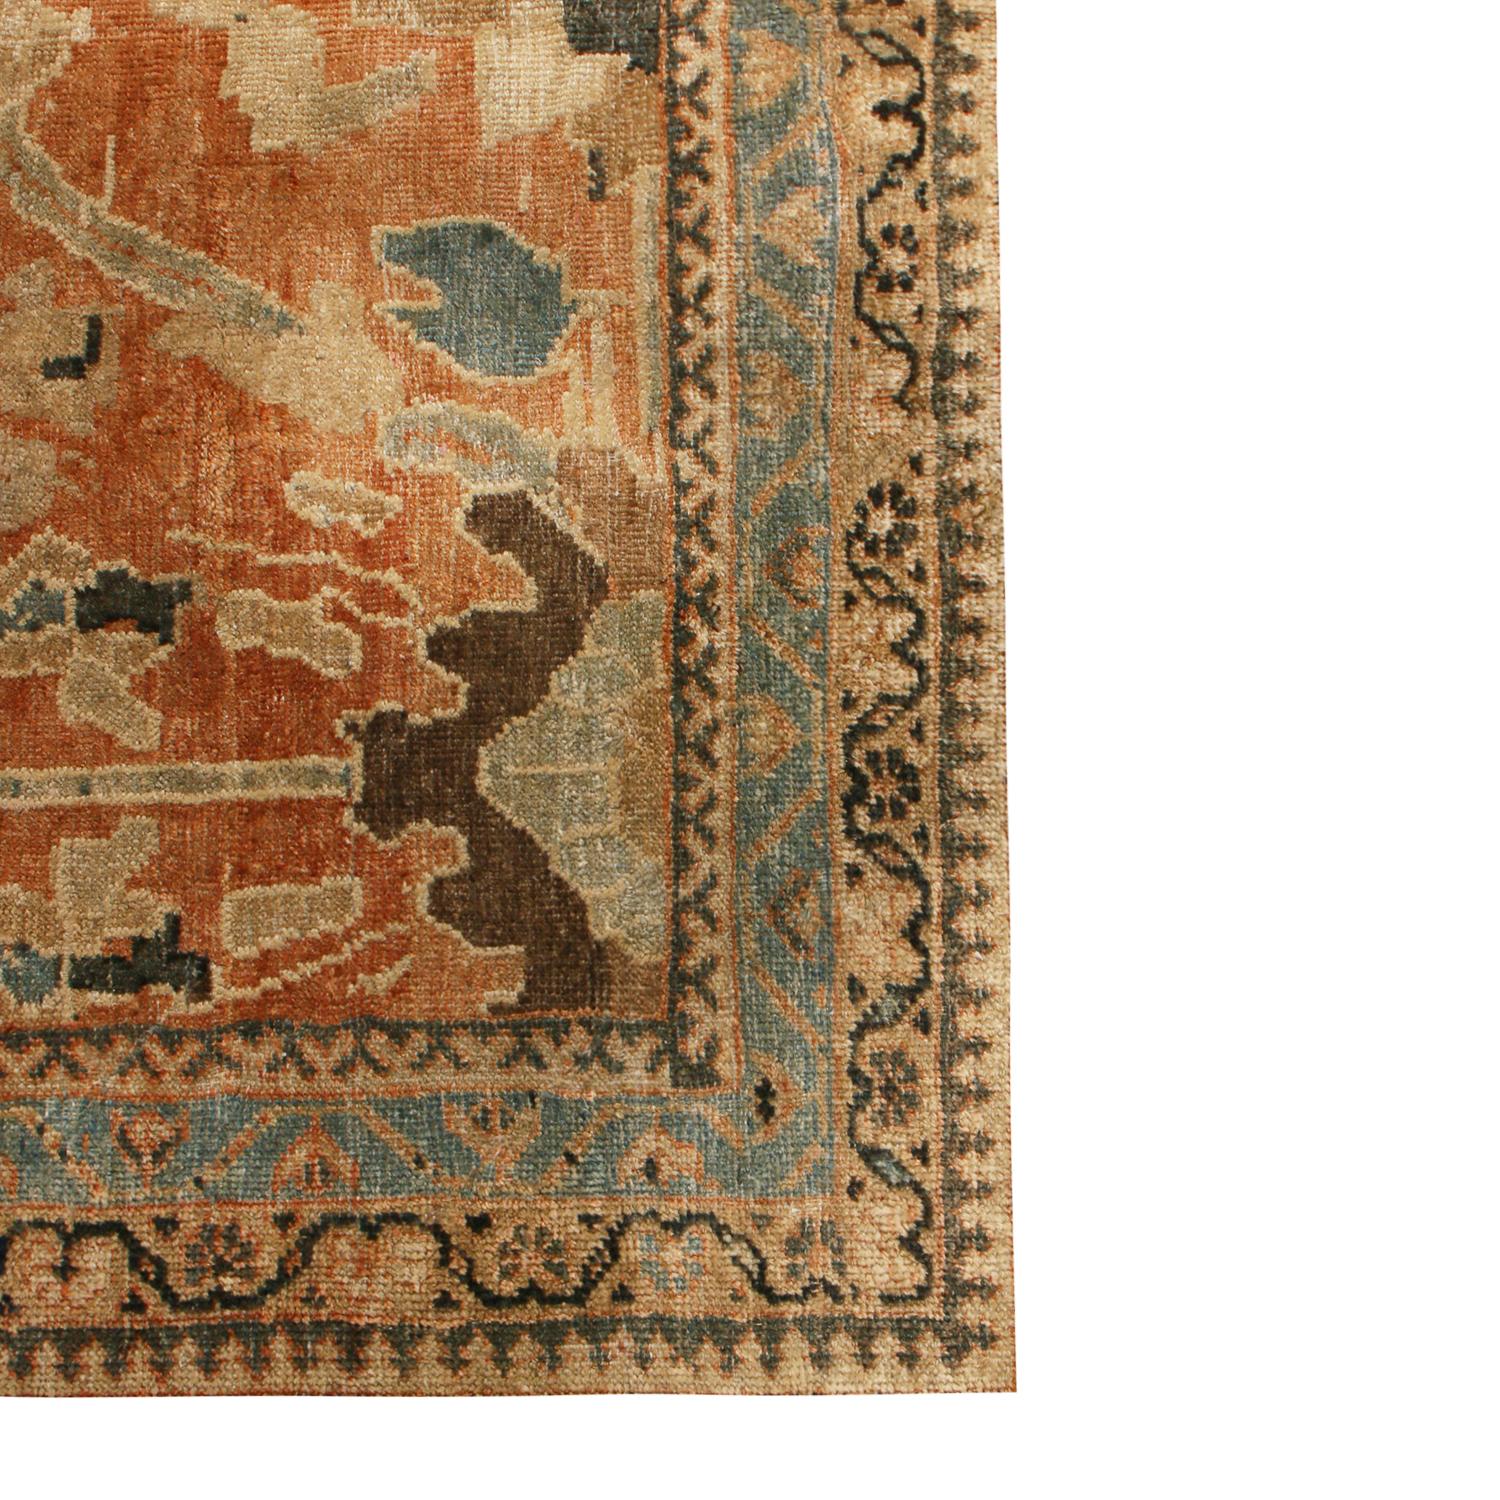 Hand-Knotted Antique Sultanabad Geometric Orange and Beige Wool Persian Rug